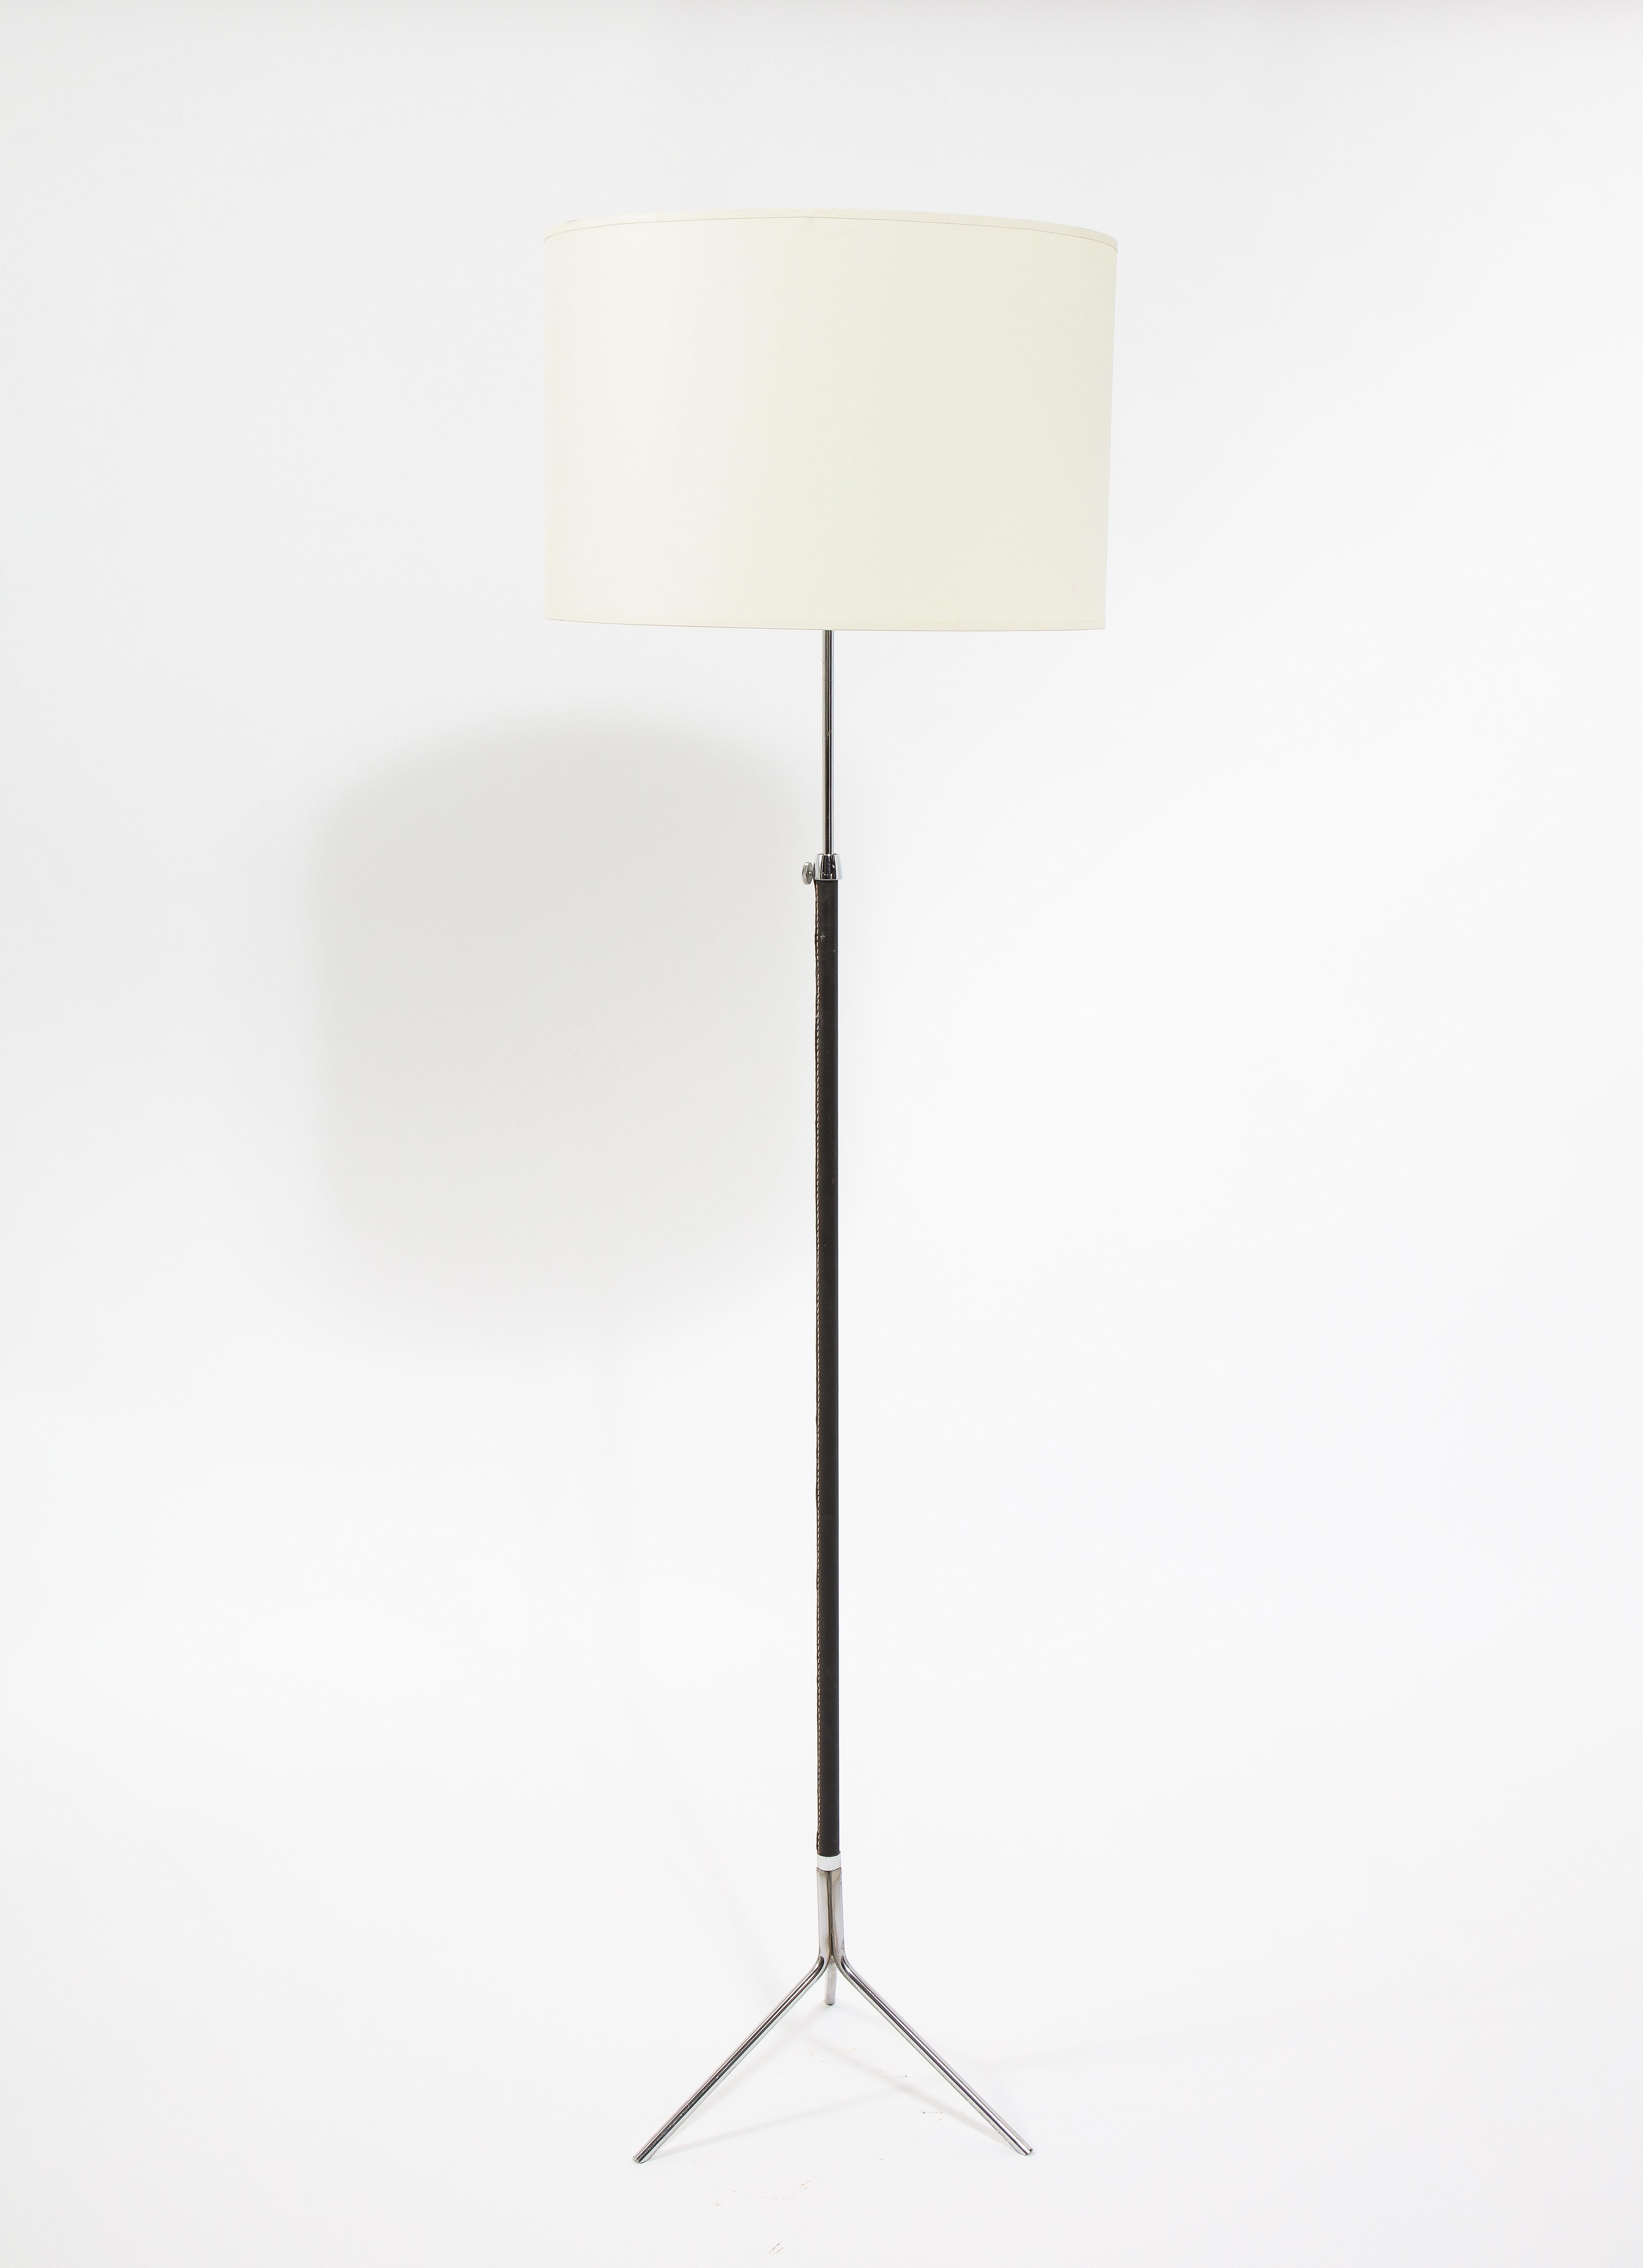 Elegant nickel-plated brass and leather standing lamp with adjustable height. Shade is for photographic purposes.